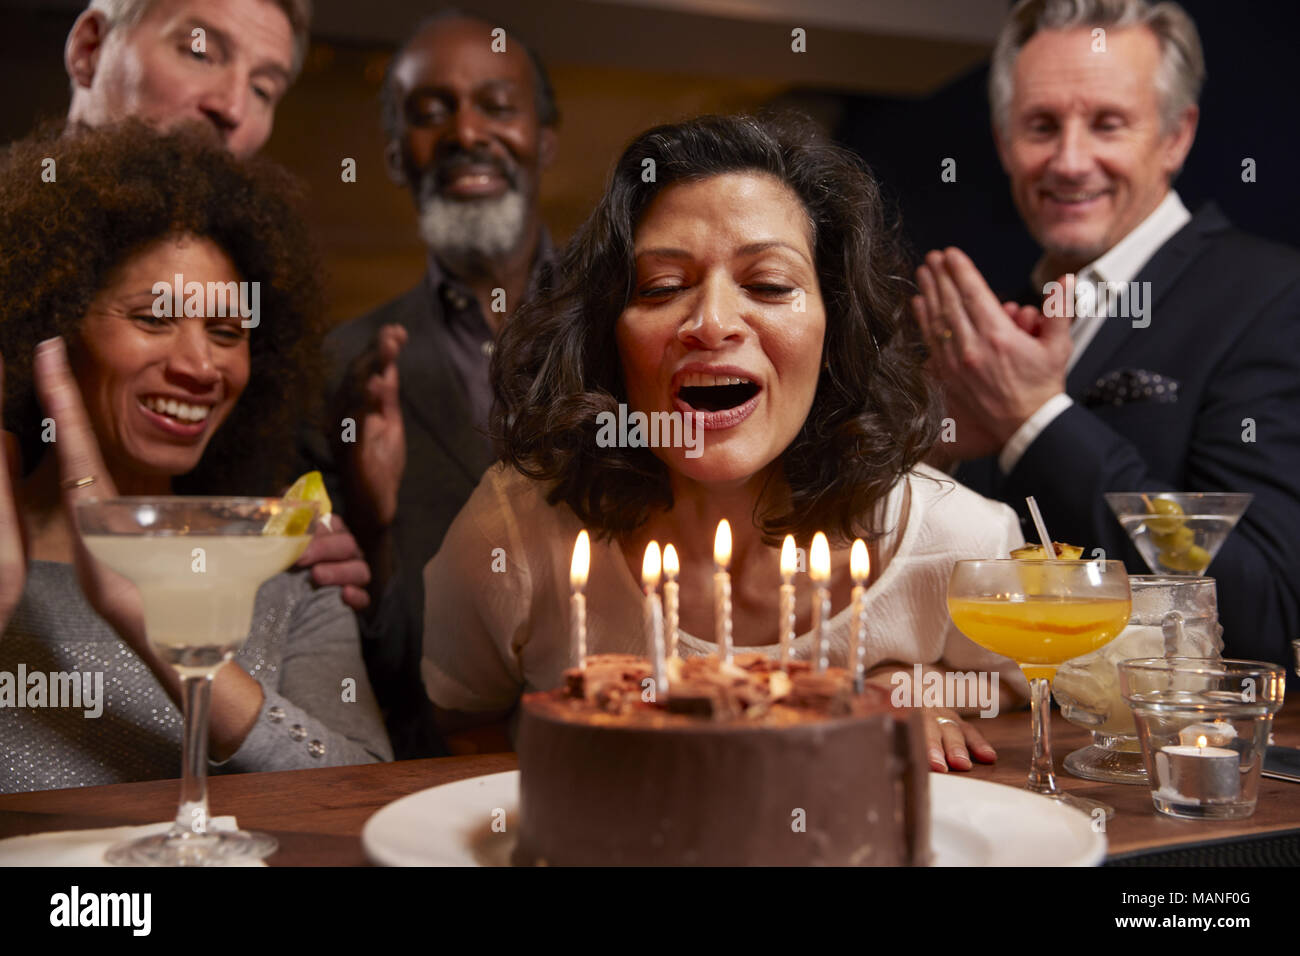 Group Of Middle Aged Friends Celebrating Birthday In Bar Stock Photo